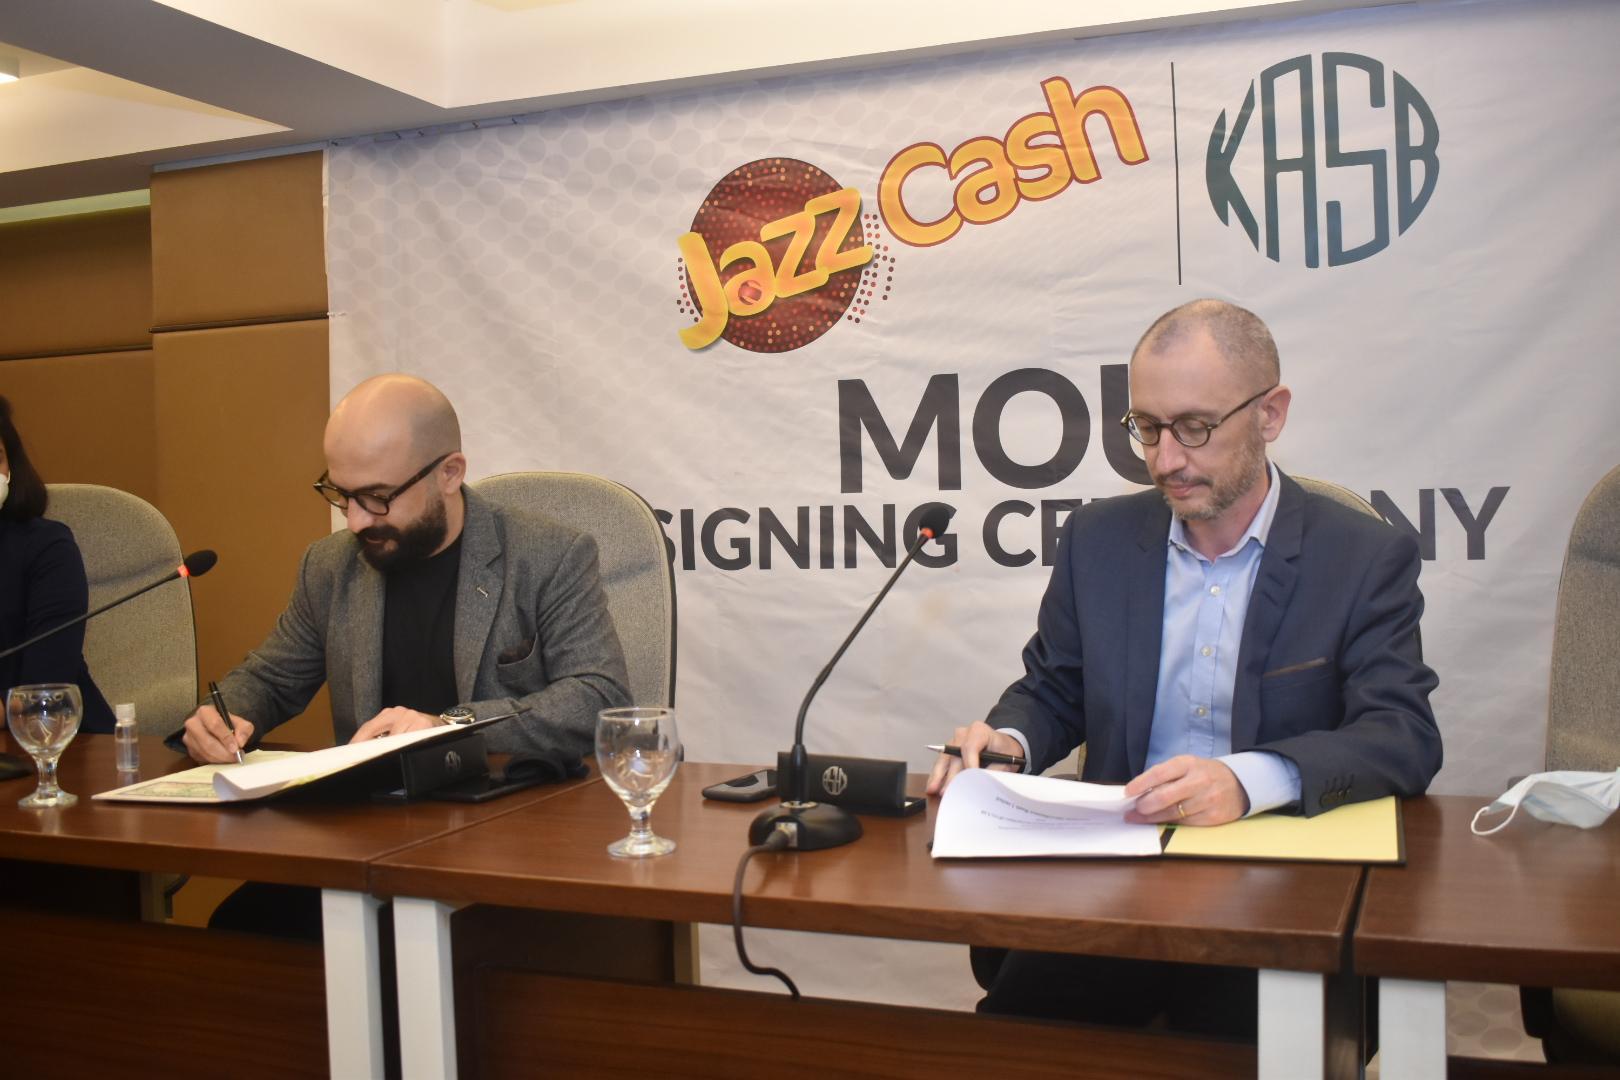 JazzCash and KASB Securities join hands to promote retail investment